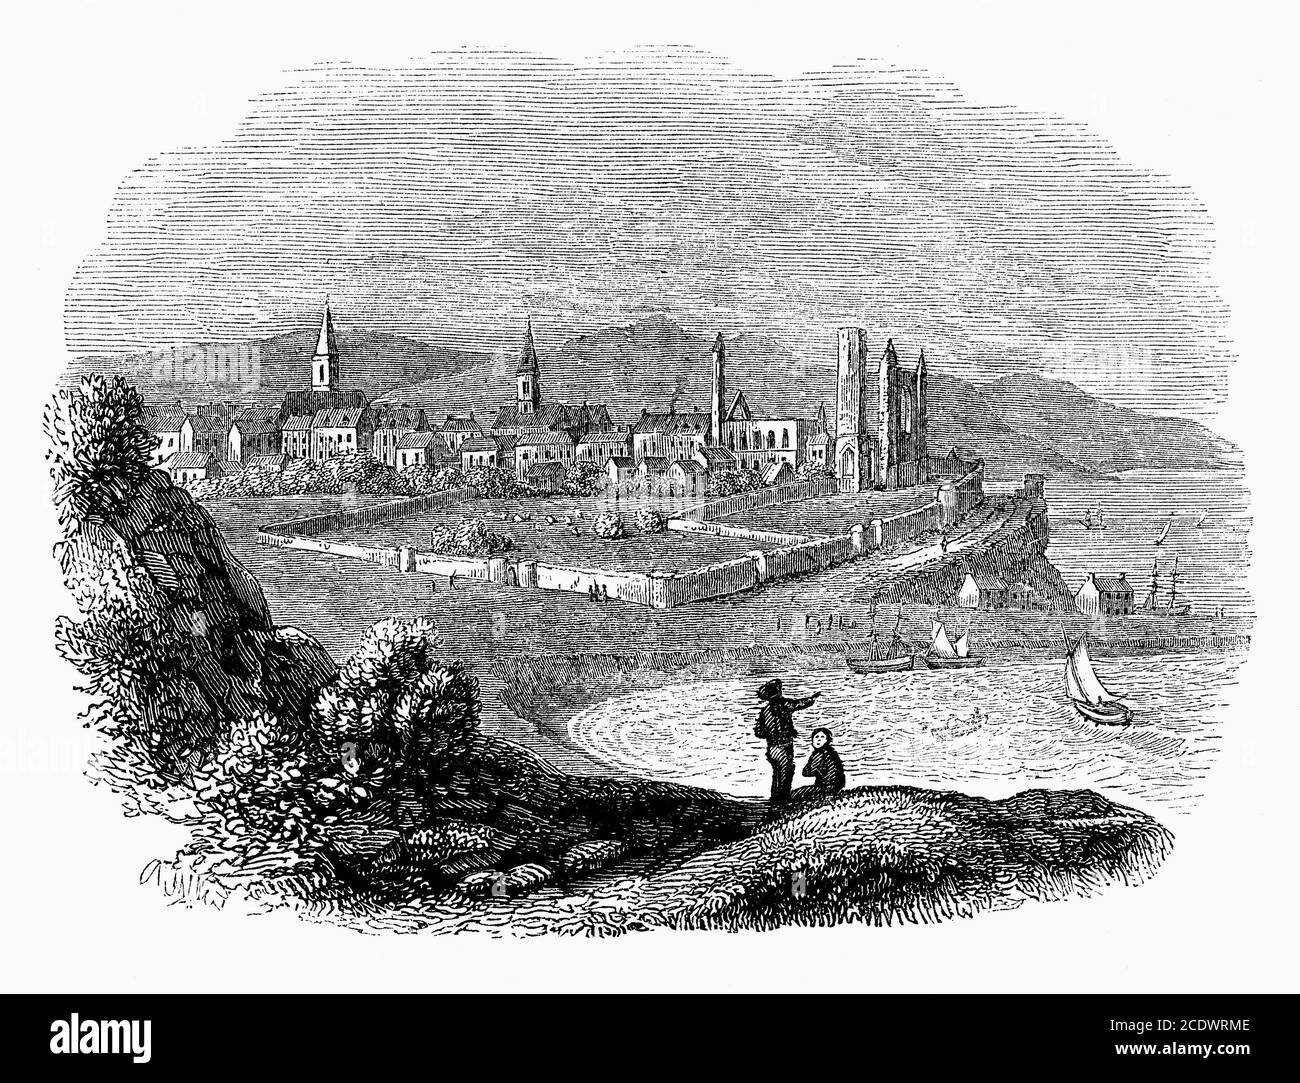 An old engraving of St Andrews, Fife, Scotland, UK, a town on the east coast of the county, 30 miles (50 km) northeast of Edinburgh. The town is home to the University of St Andrews, the third oldest university in the English-speaking world. The famous St Andrews cathedral (centre right), the largest in Scotland, was built in 1160. In 1559, the town fell into decay after the violent Scottish Reformation and the Wars of the Three Kingdoms. It lost its status of ecclesiastical capital of Scotland and the cathedral became ruins. St Andrews is also known worldwide as the ‘home of golf’. Stock Photo